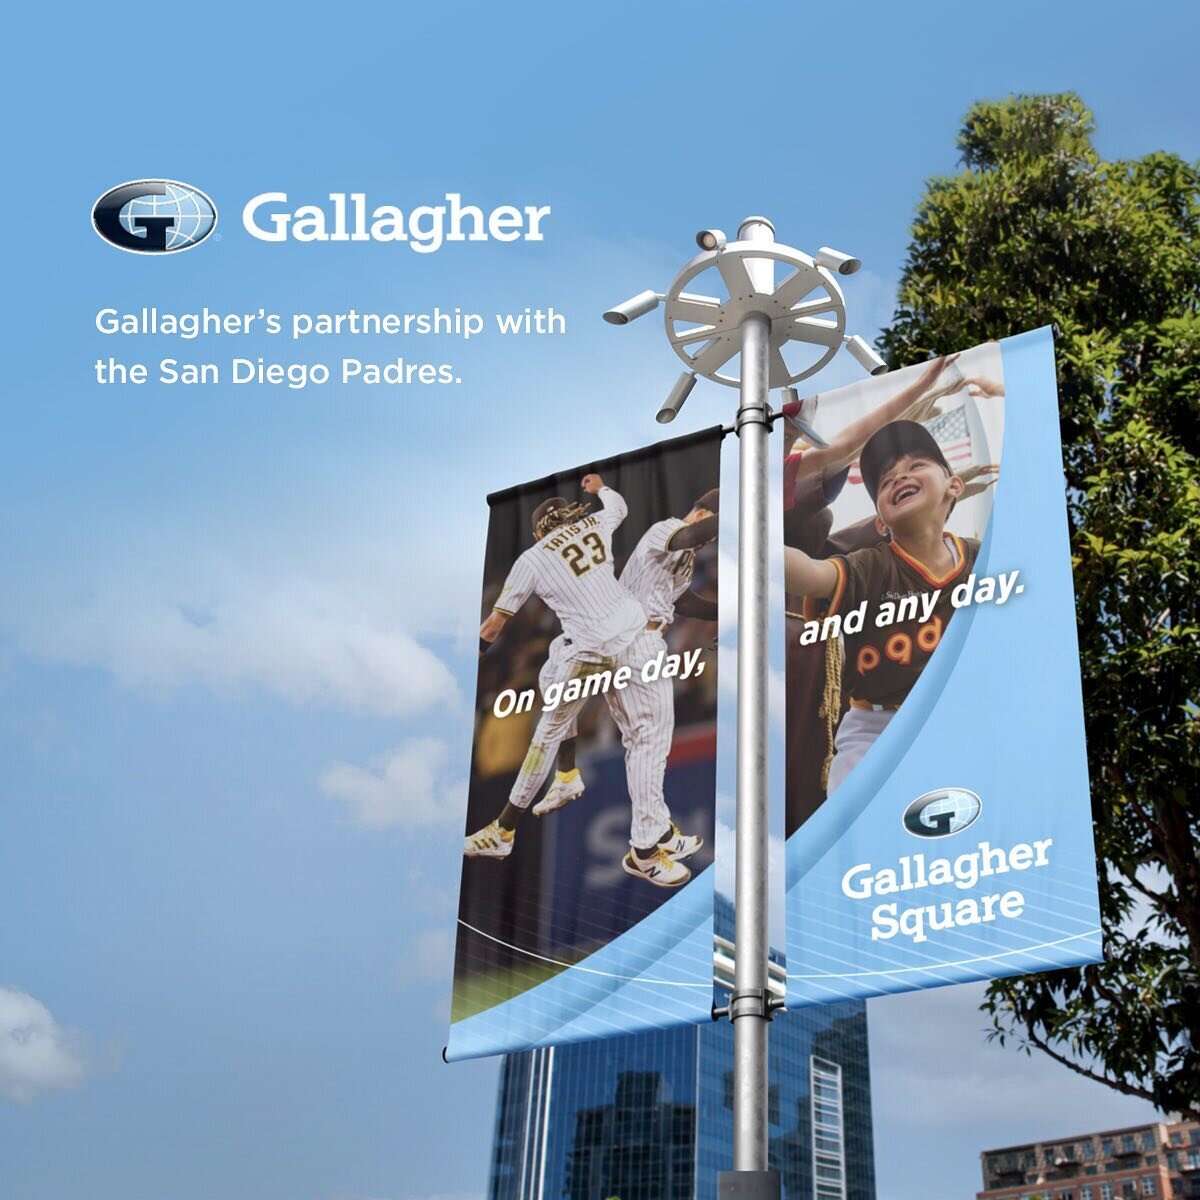 As a proud partner of the San Diego Padres, Gallagher brings the San Diego community together both on and off game days. At Gallagher Square, members from all corners of the San Diego community can come together in a unique, Gallagher branded space. 